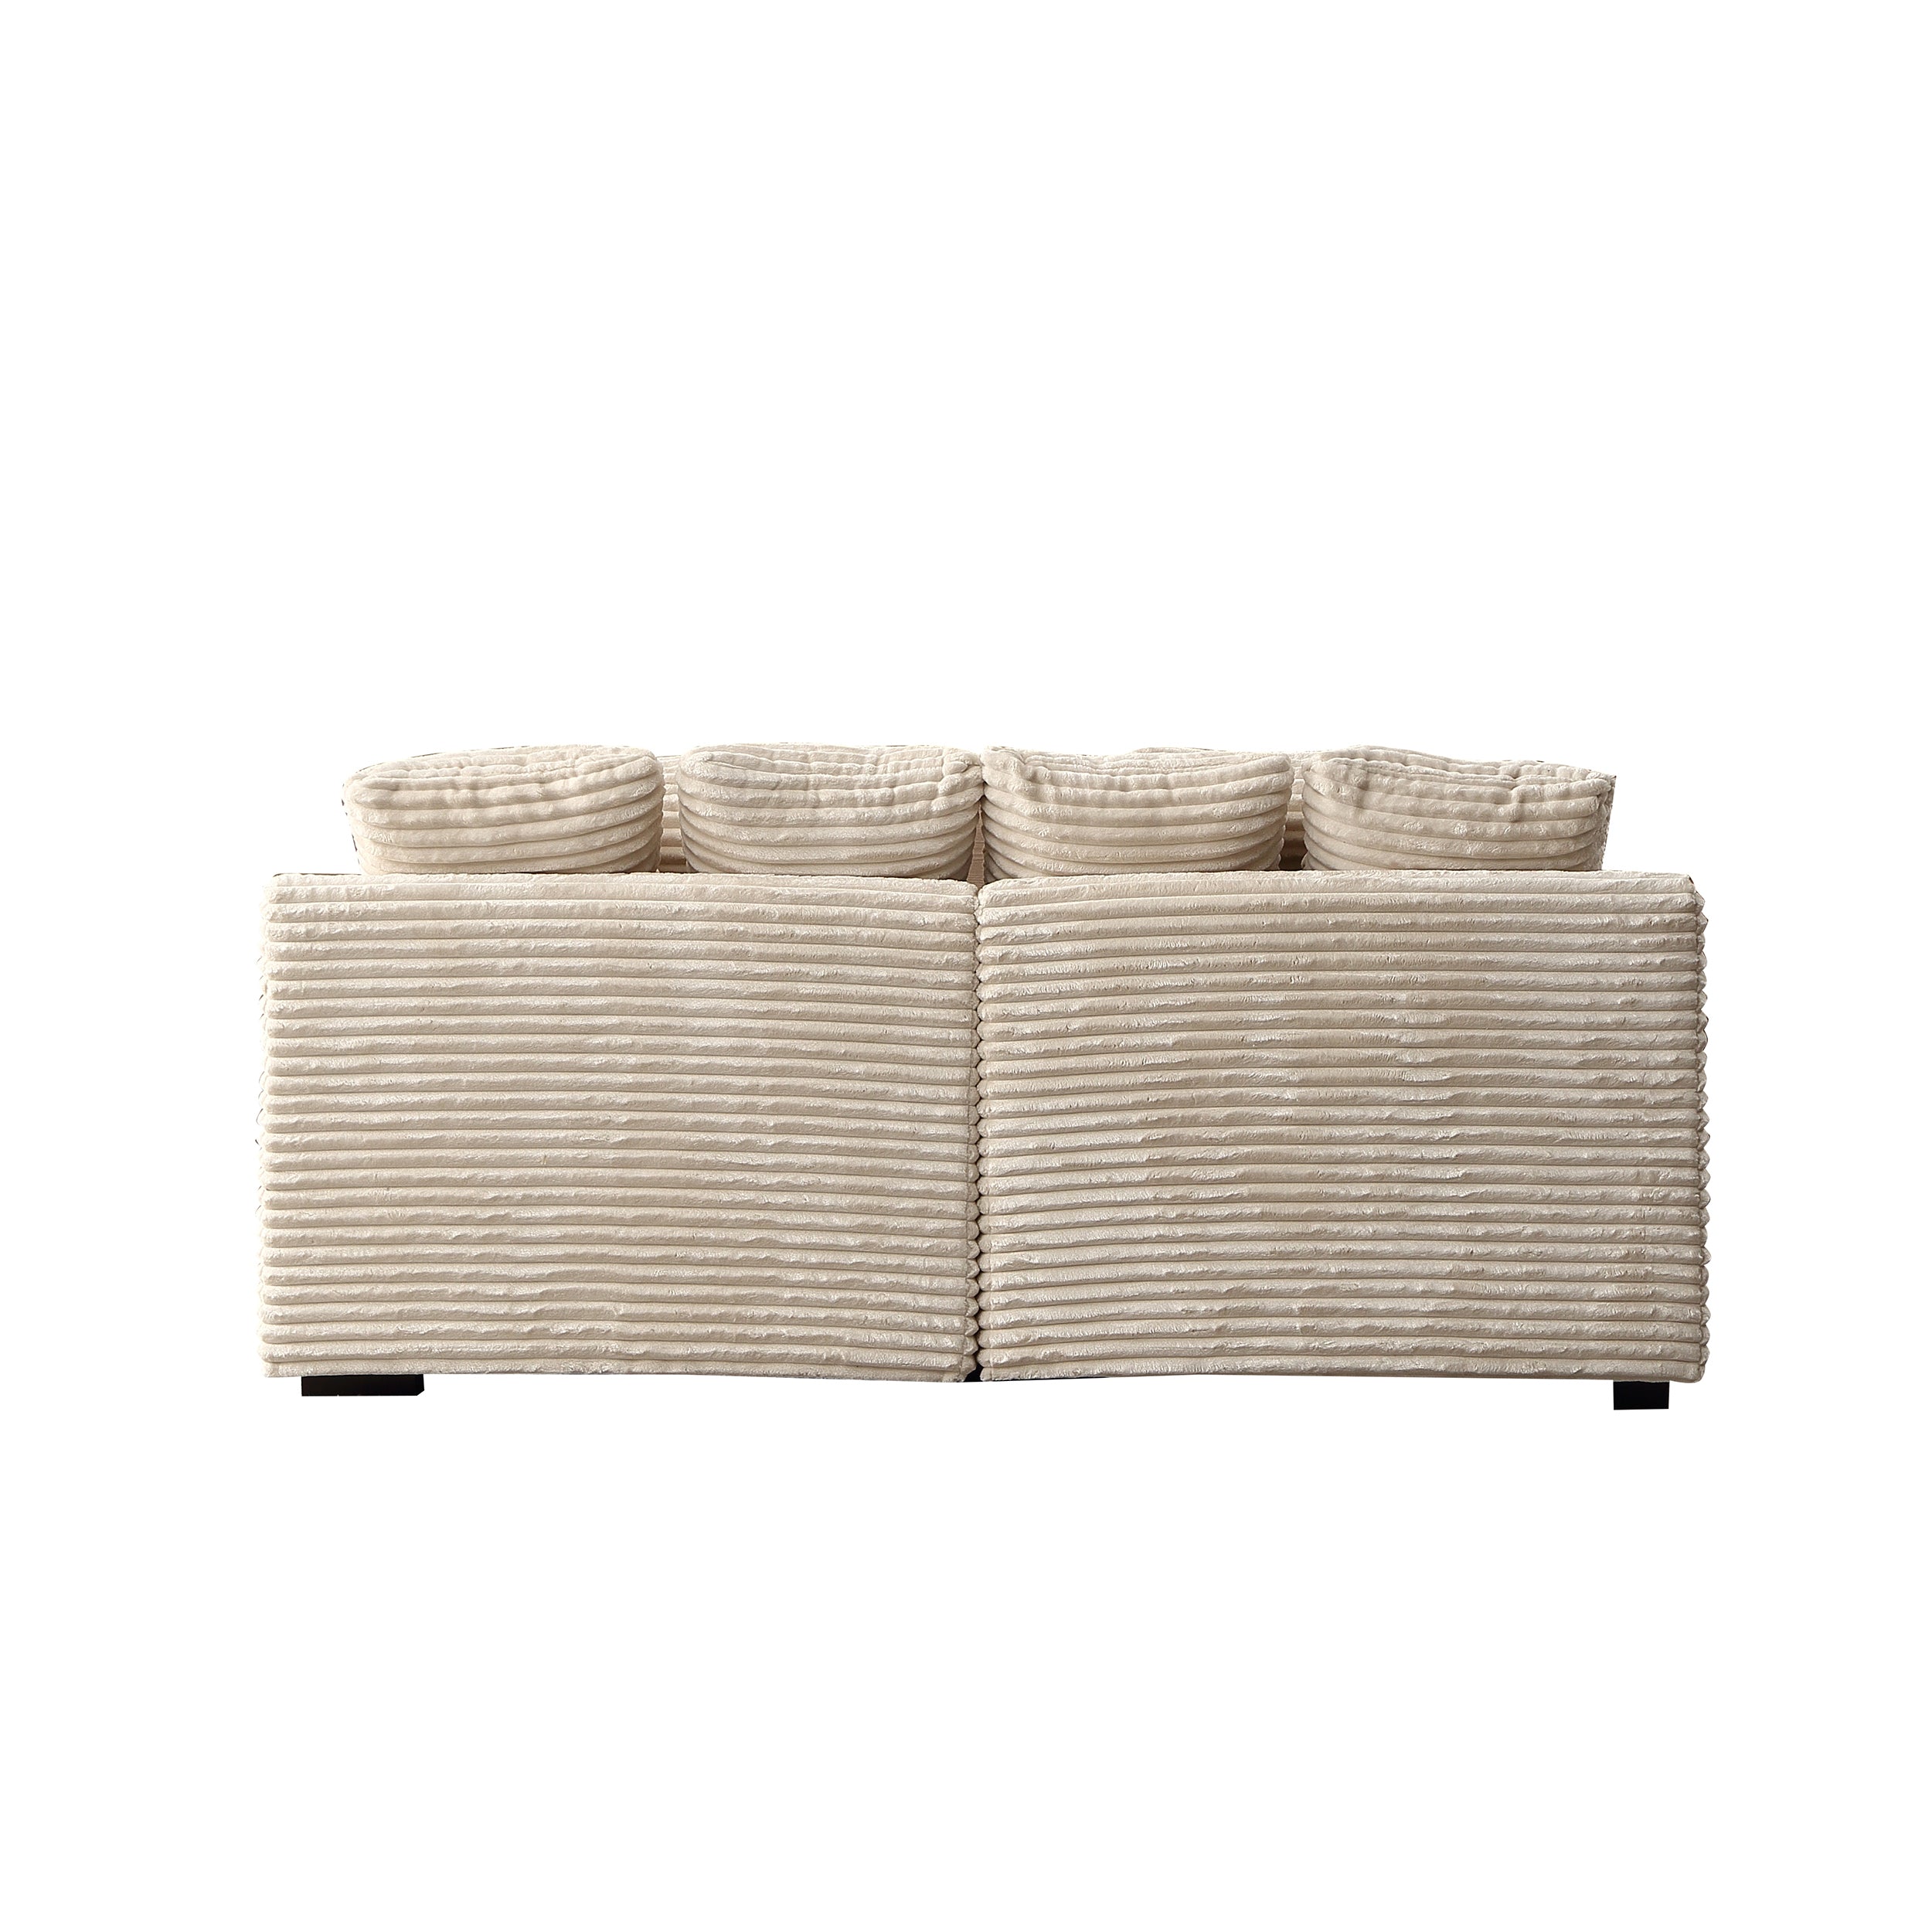 Louie Corduroy Sectional Sofa, Deep Seat Double Chaise Couch - Beige